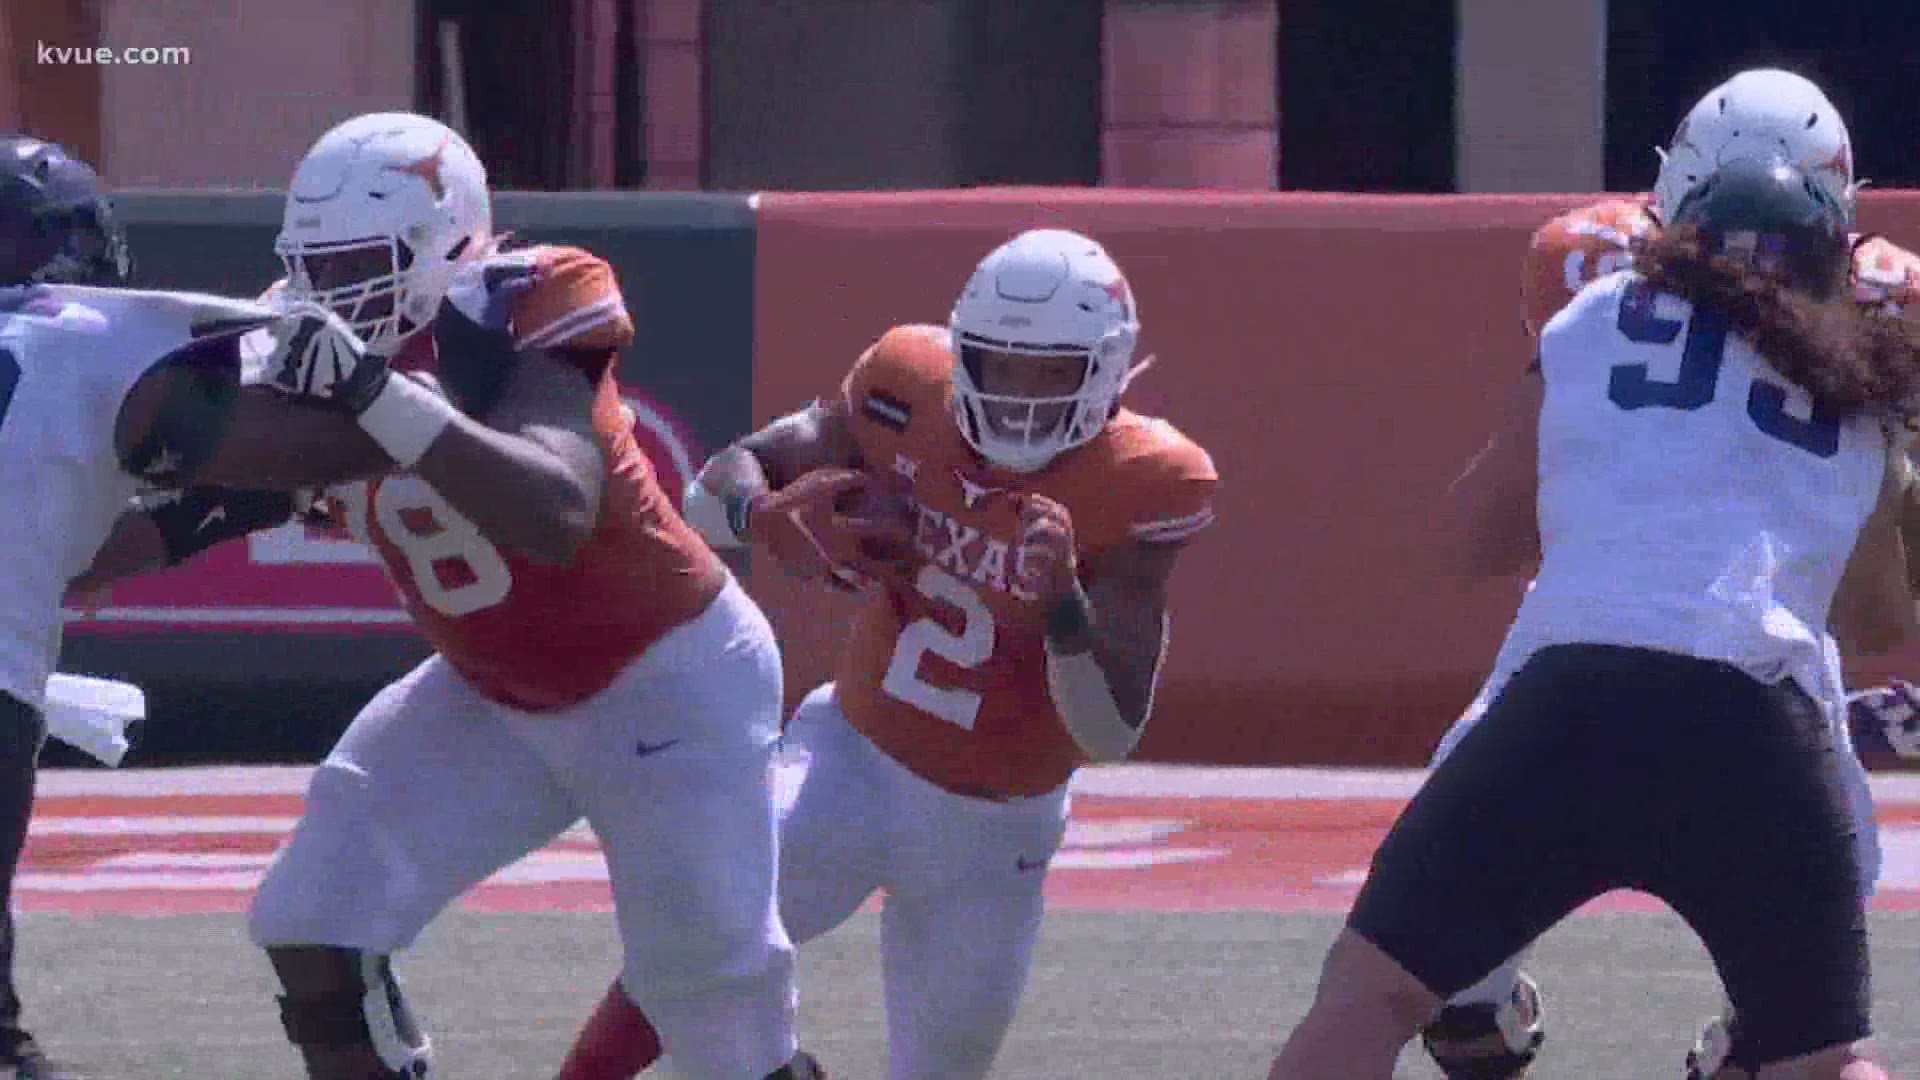 The KVUE Sports addressed some of the top headlines surrounding Texas Longhorns football after four games of the 2020 season.